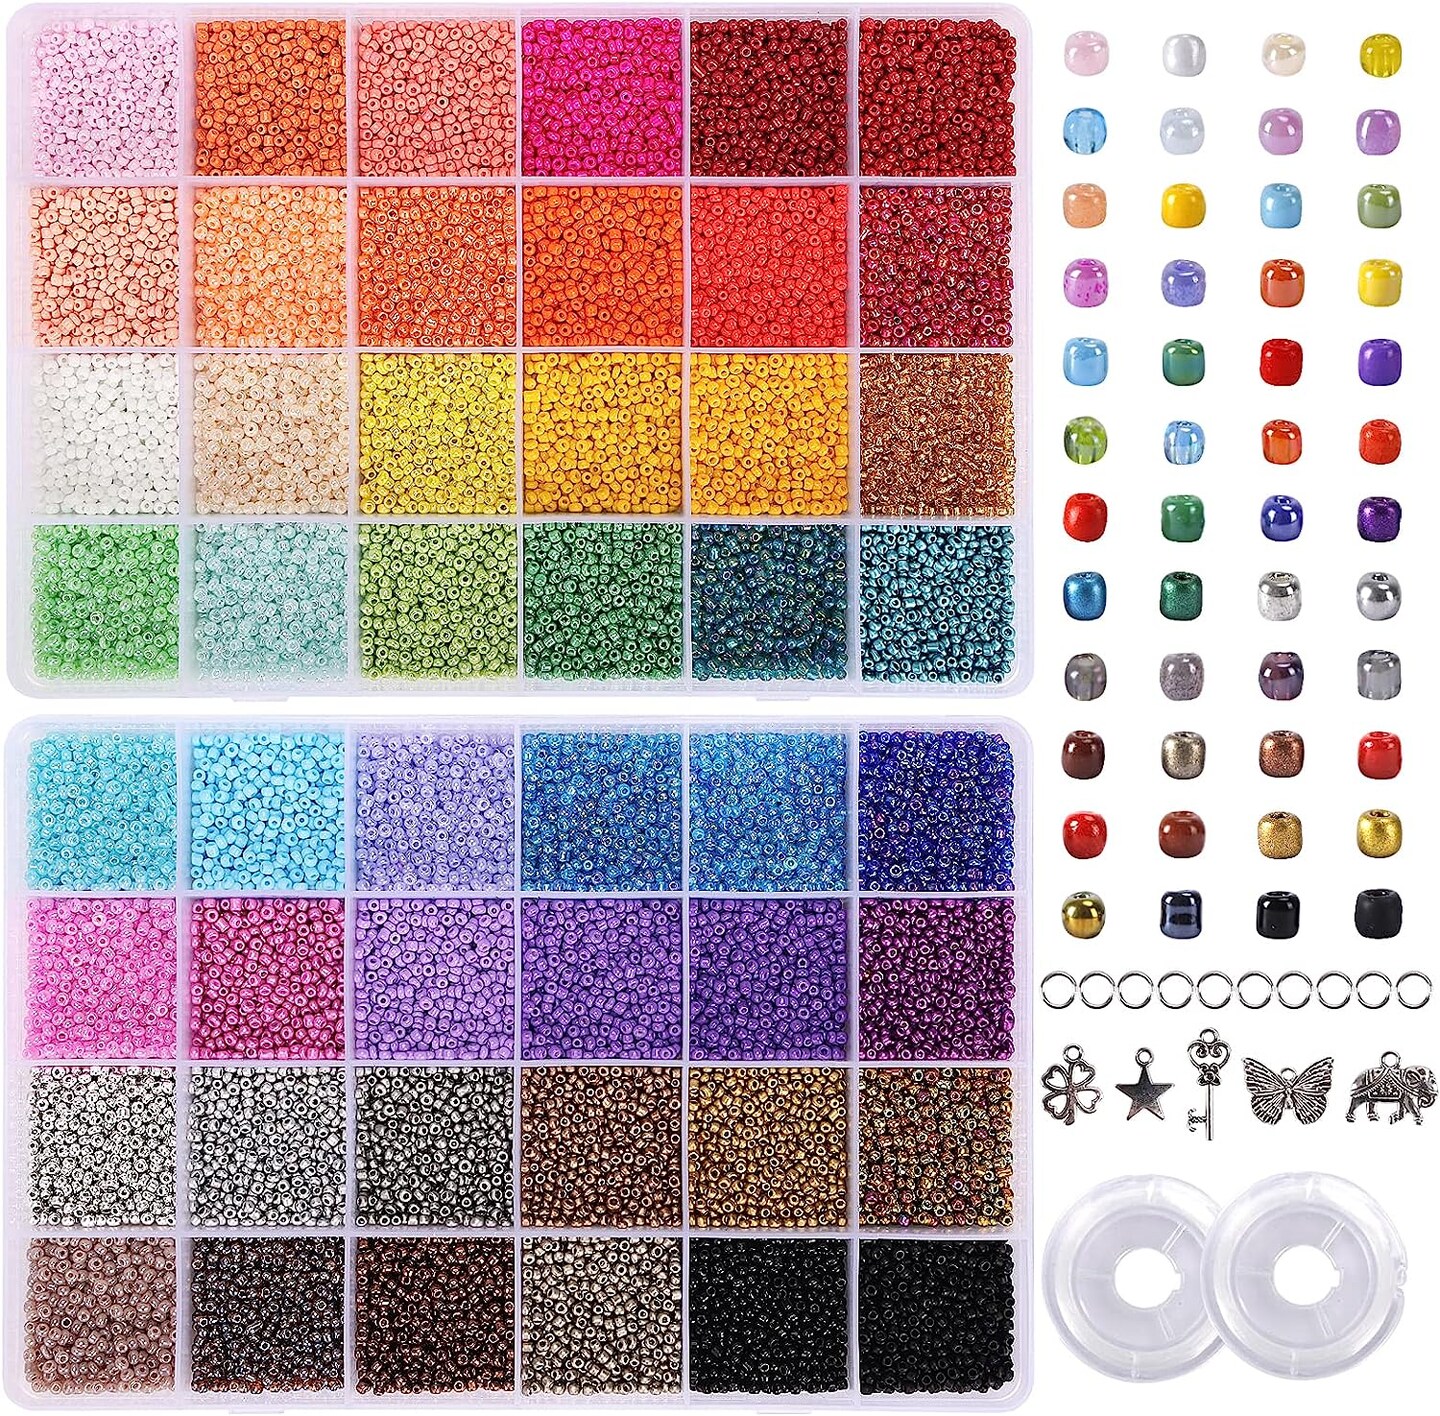 44000pcs 2mm Glass Seed Beads for Bracelet Making Kit, 48 Colors Small Beads, Craft Beads Kit for Jewelry Making, with 2 Storage Boxes, Charms, Jump Rings and Clear Elastic String Cord